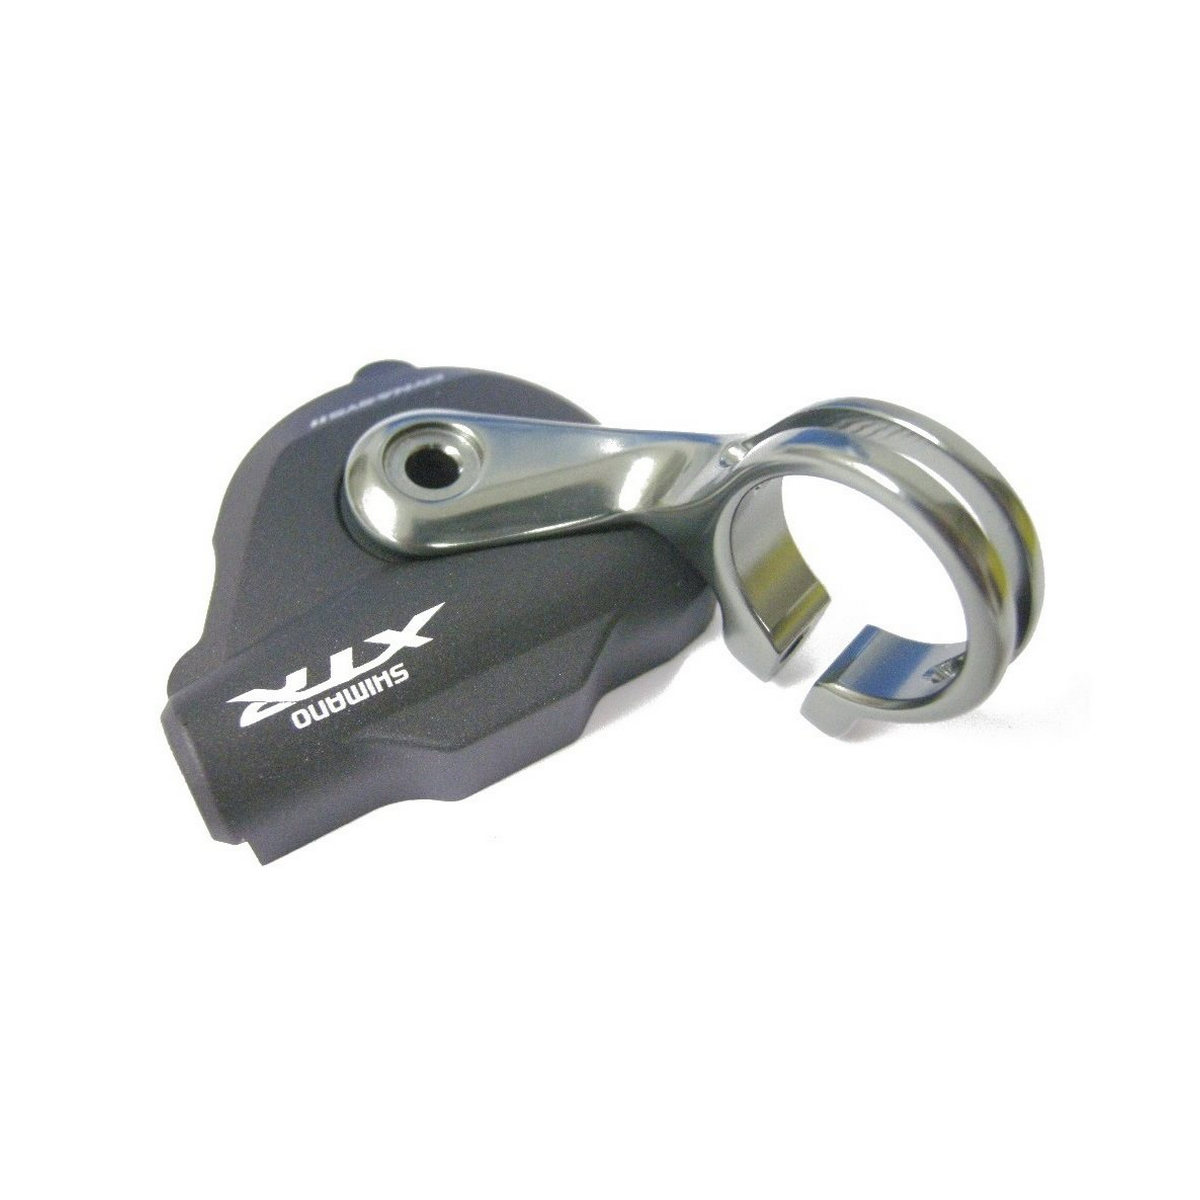 Spare cover for right-hand XTR SL-M9000 shift lever